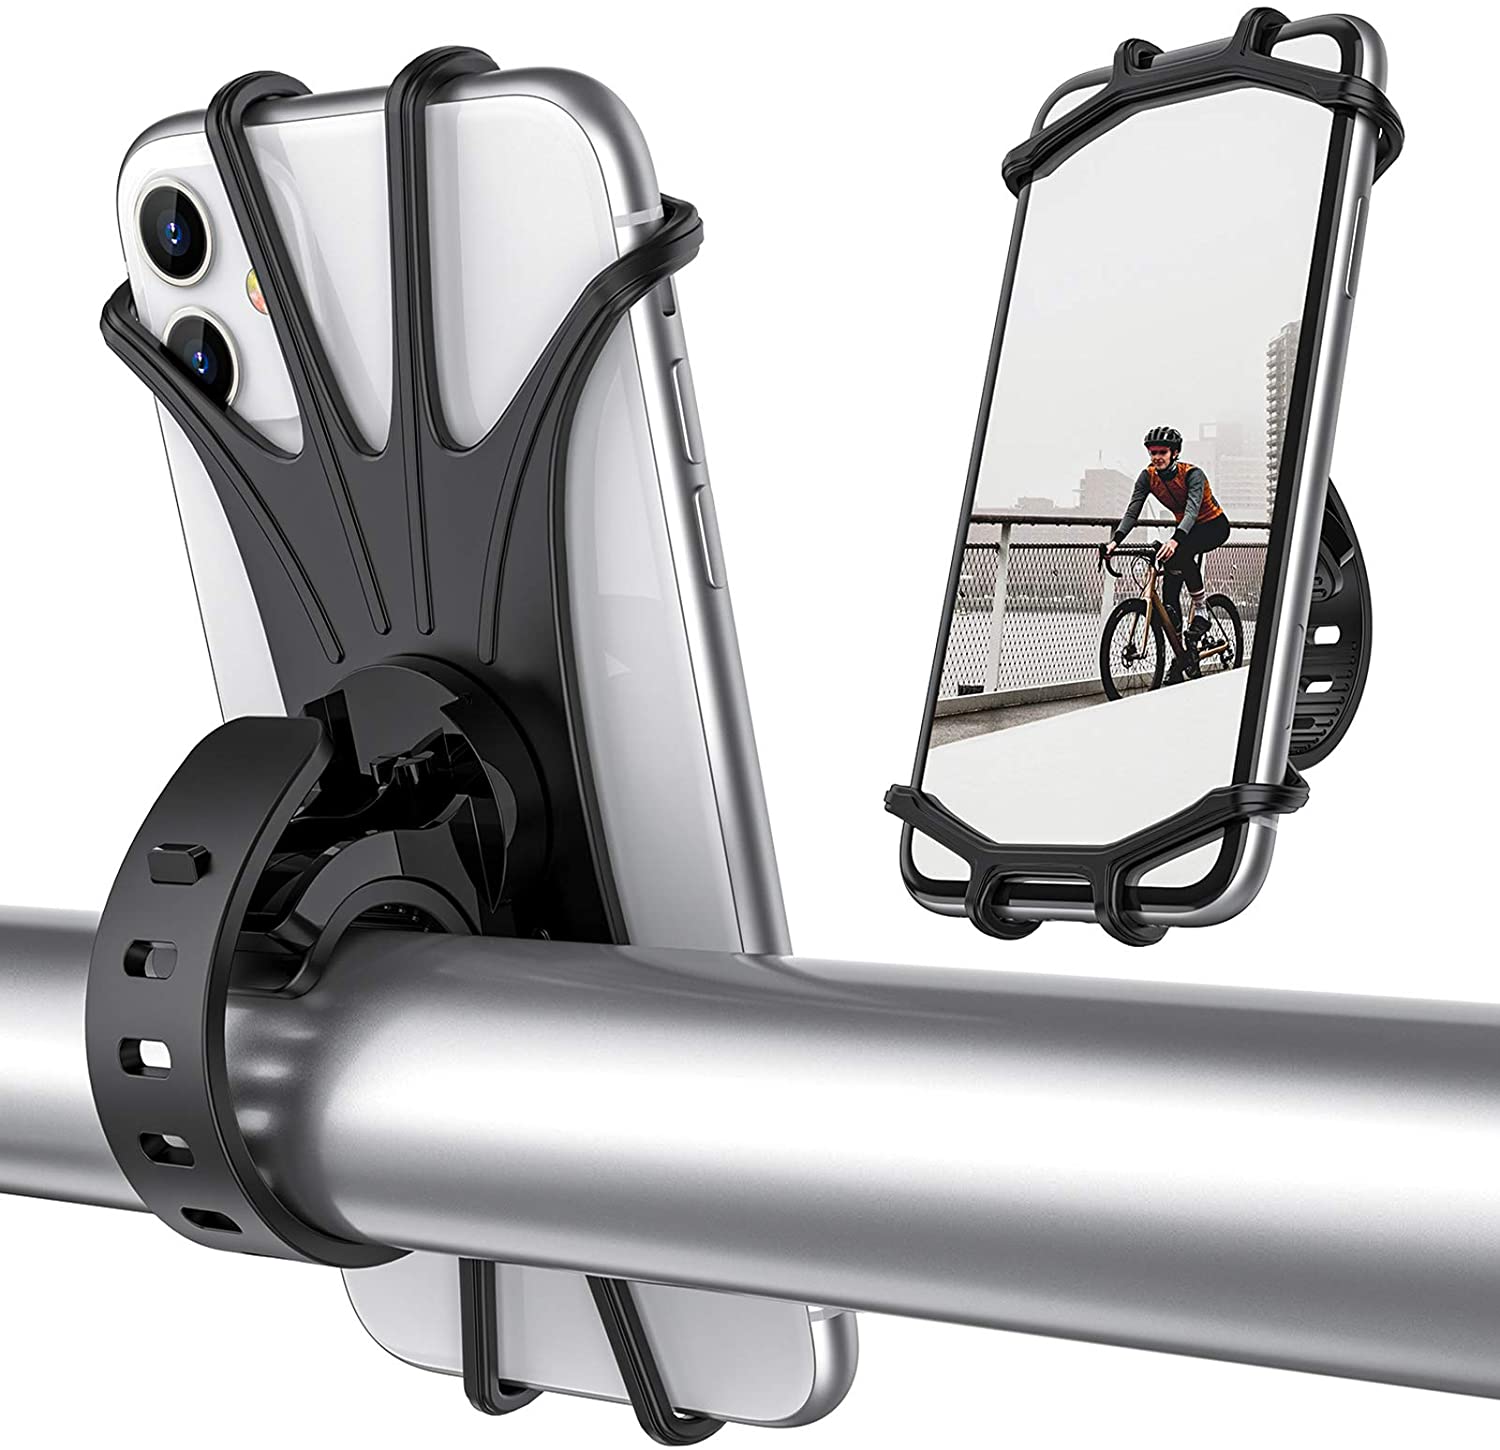 A phone holder that attaches to bike or stationary cycle, links to Amazon page when clicked